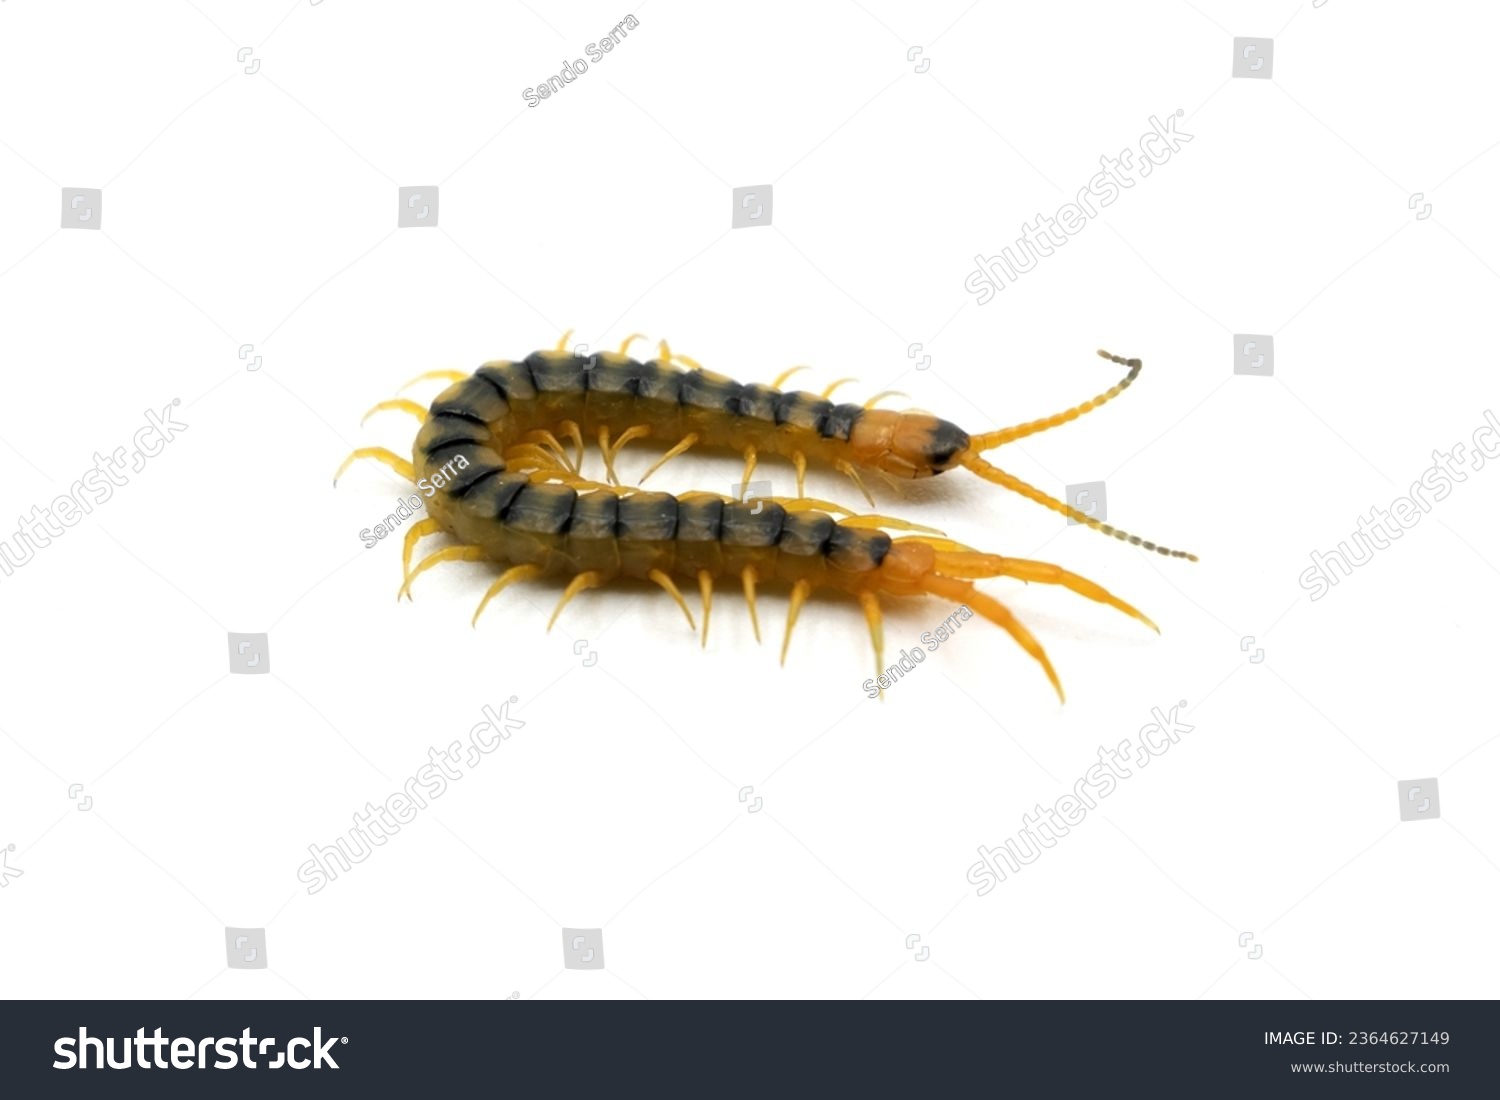 cenitipede, scolopendra isolated on white background #2364627149